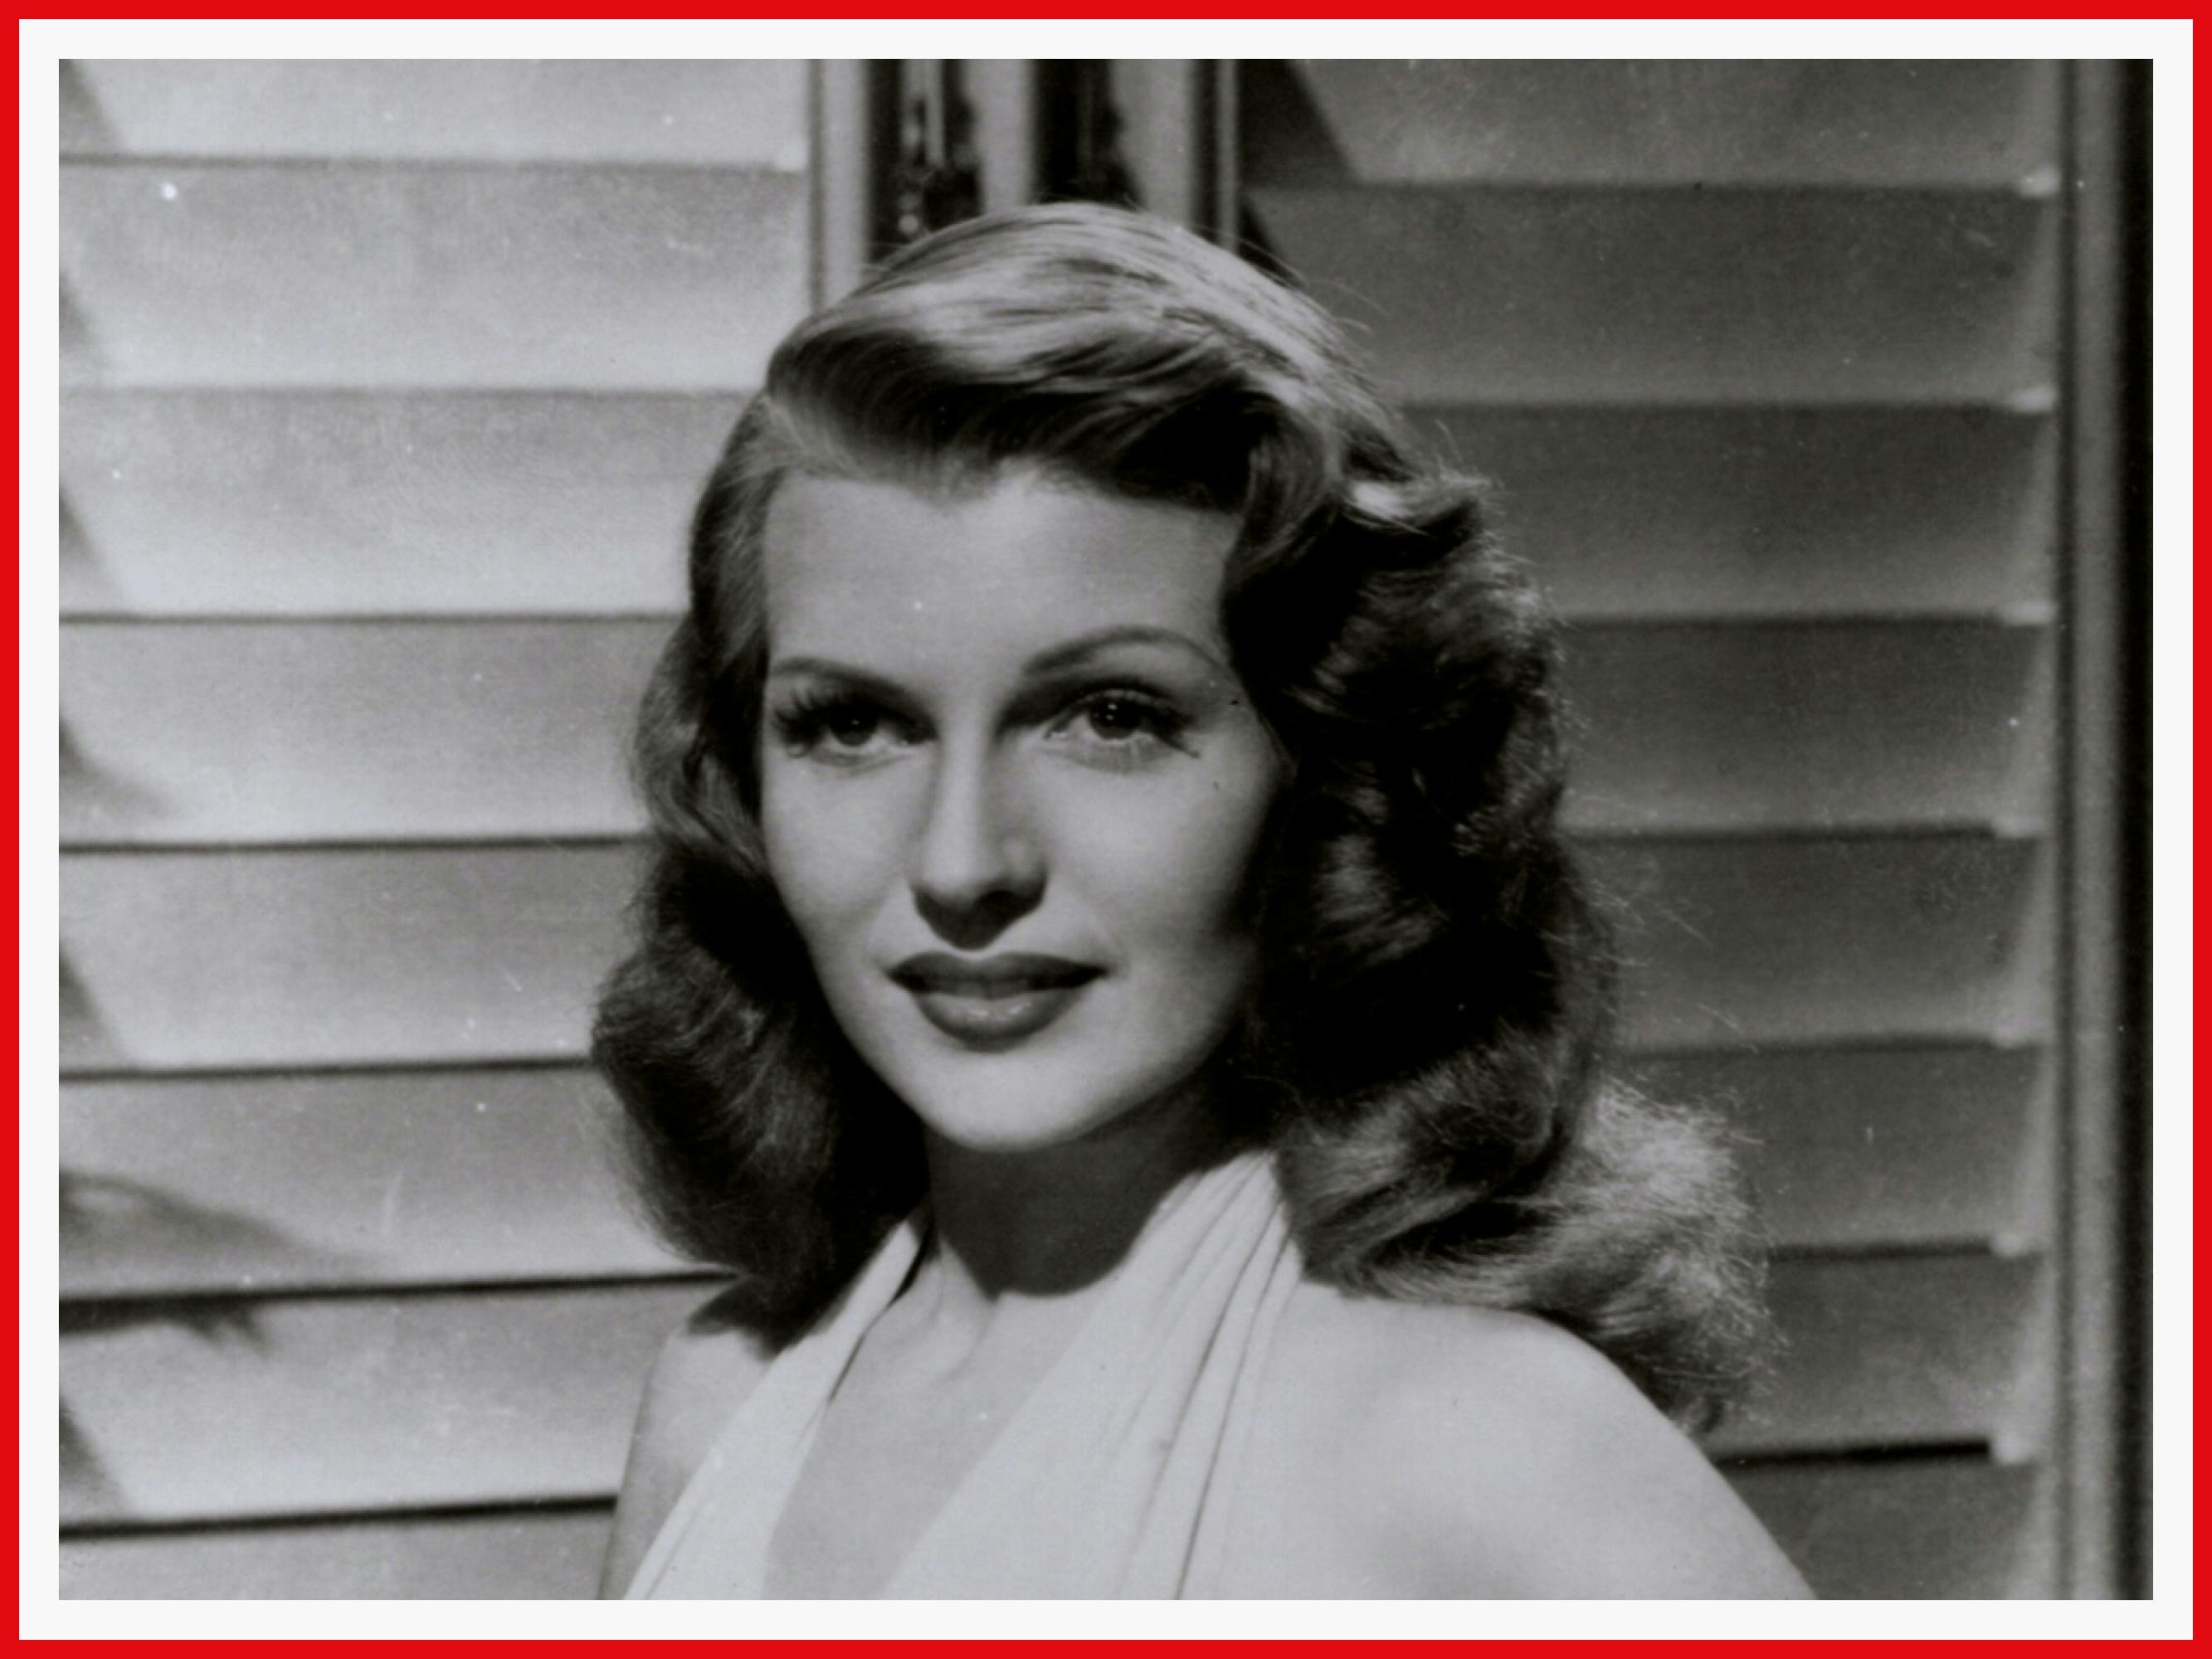 Hayworth as the title character, looking glamorous with tressed hair in a white halter dress